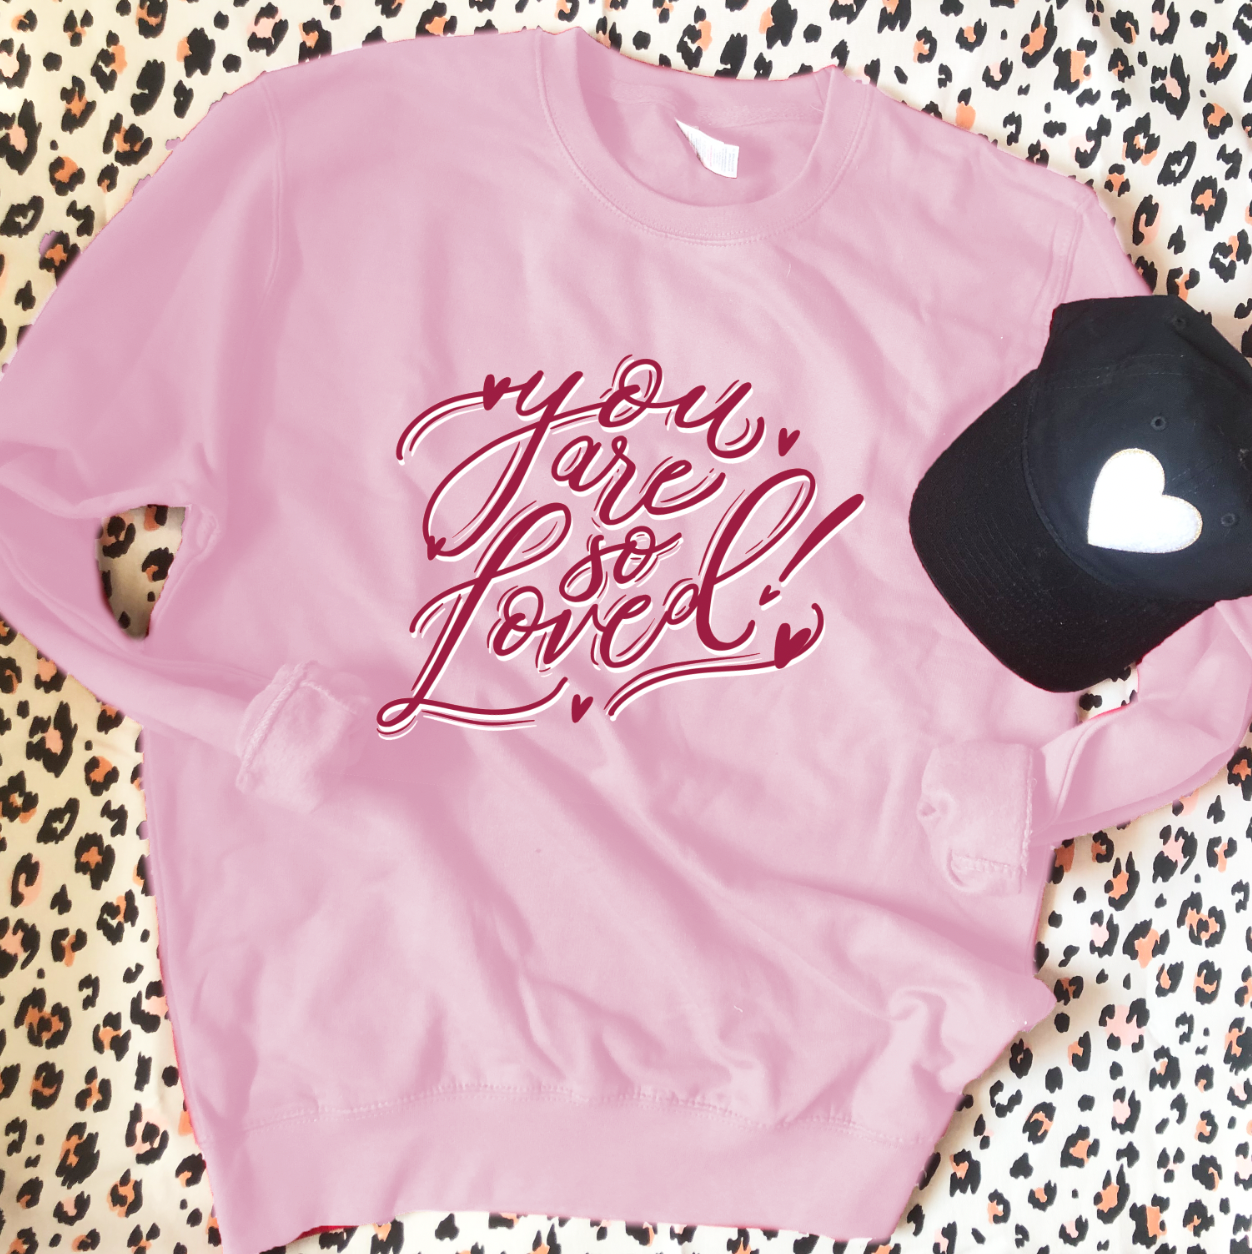 VALENTINE'S DAY: You Are So Loved (SWEATSHIRT)